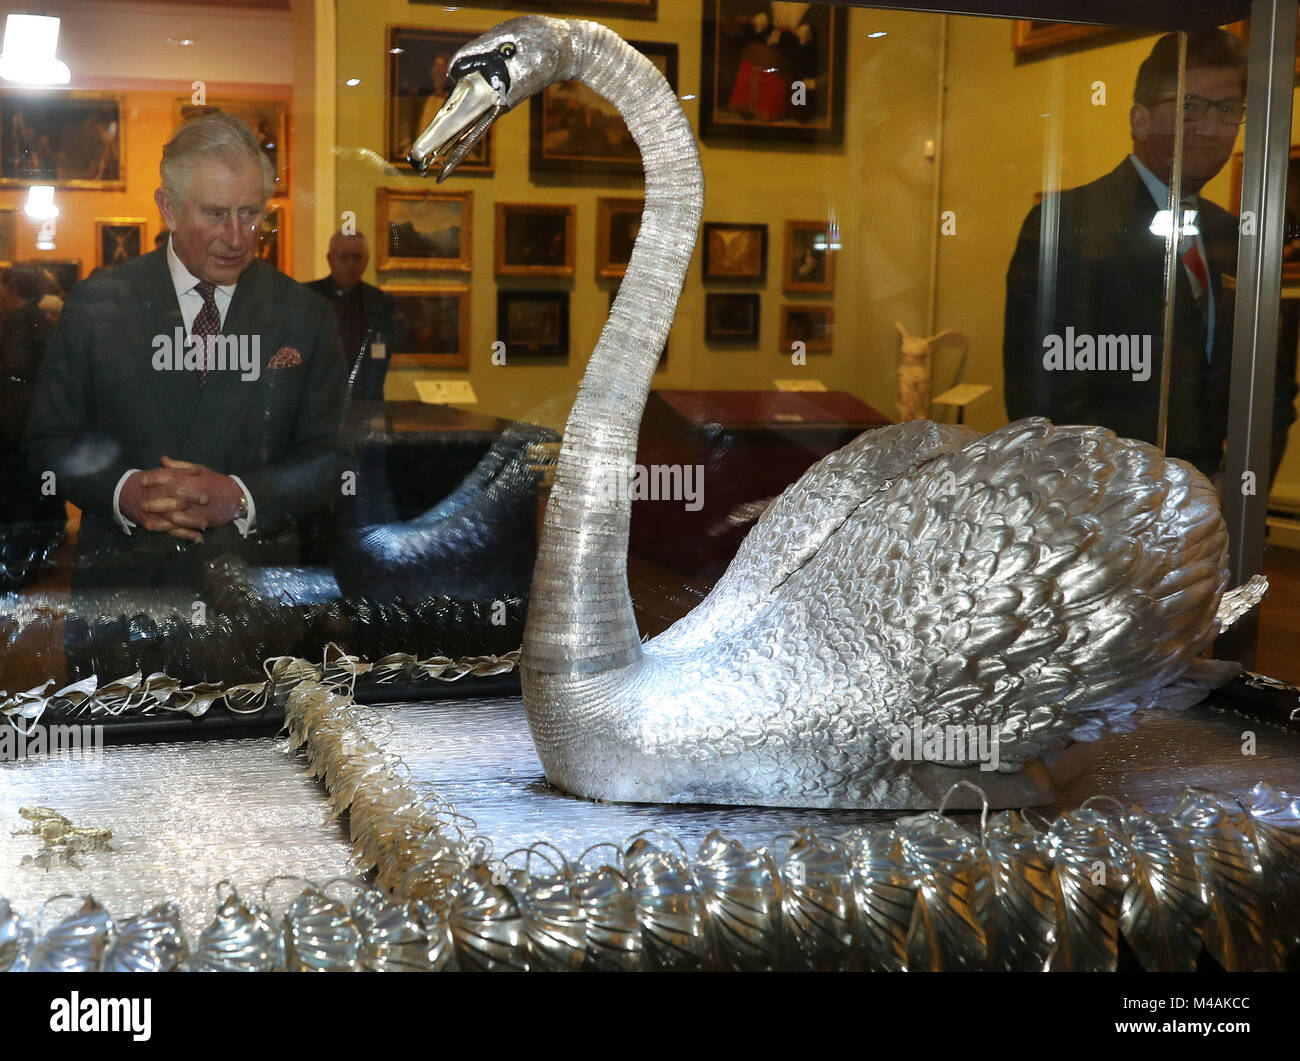 The Prince of Wales (left) looks at the Silver Swan musical automaton, which dates from 1773, during a visit to the Bowes Museum in Barnard Castle. Stock Photo